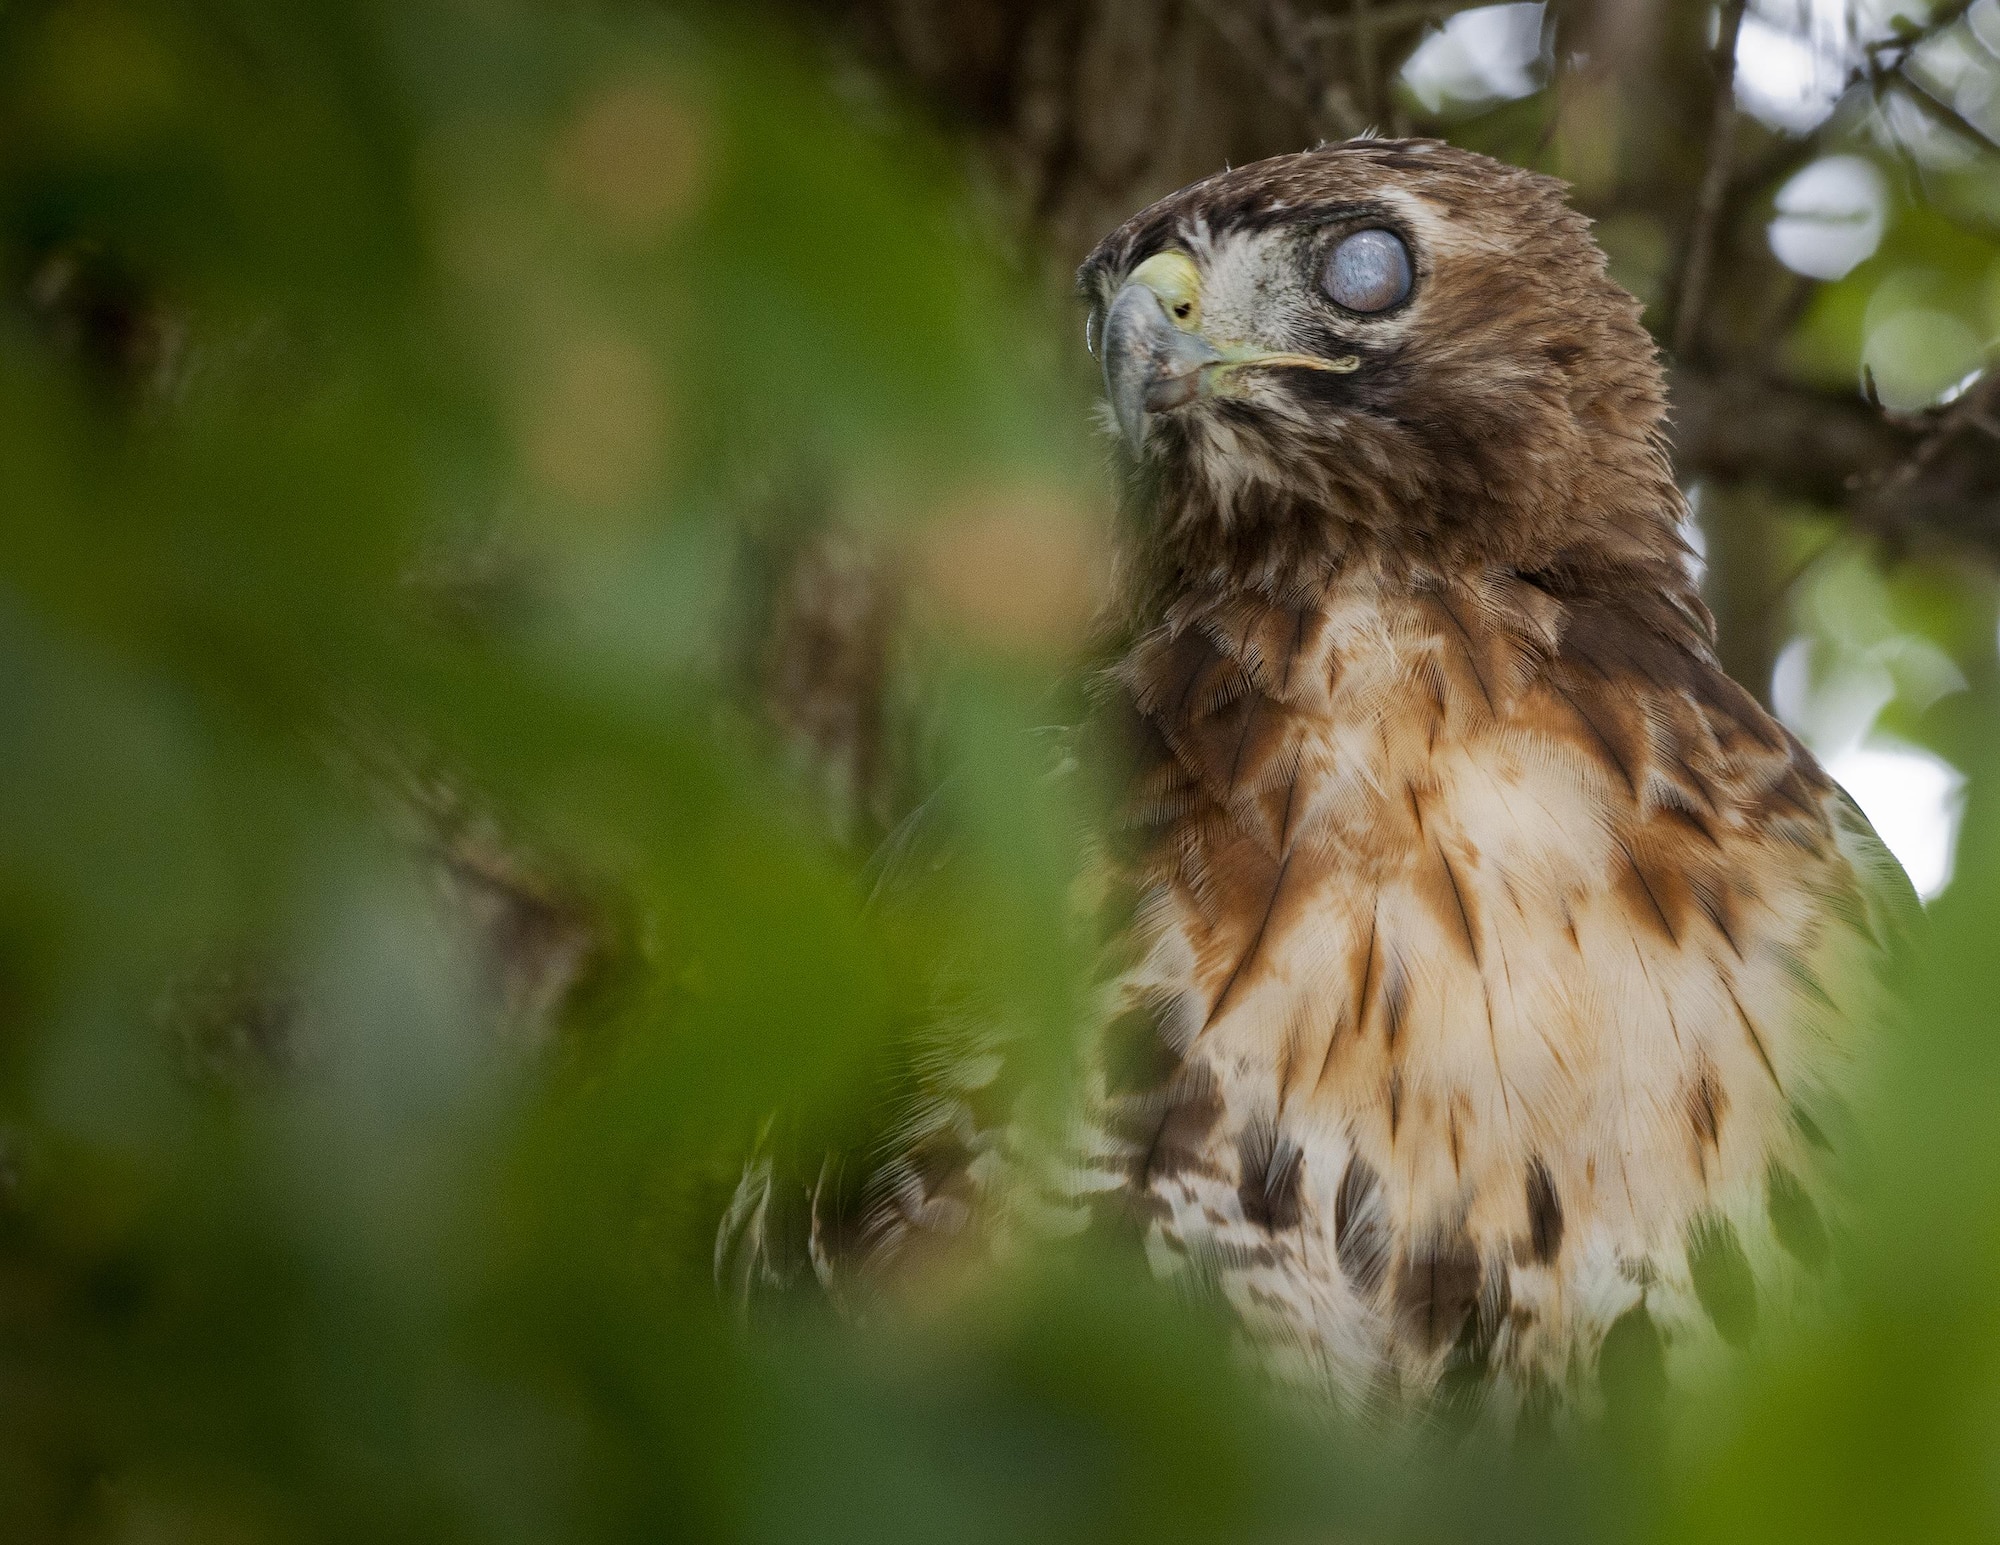 A red-tailed hawk blinks while perched on a branch of a tree July 15 at Eglin Air Force Base, Fla.  This bird of prey is just one of many unique bird species located on the base and its outlying ranges.  (U.S. Air Force photo/Samuel King Jr.)